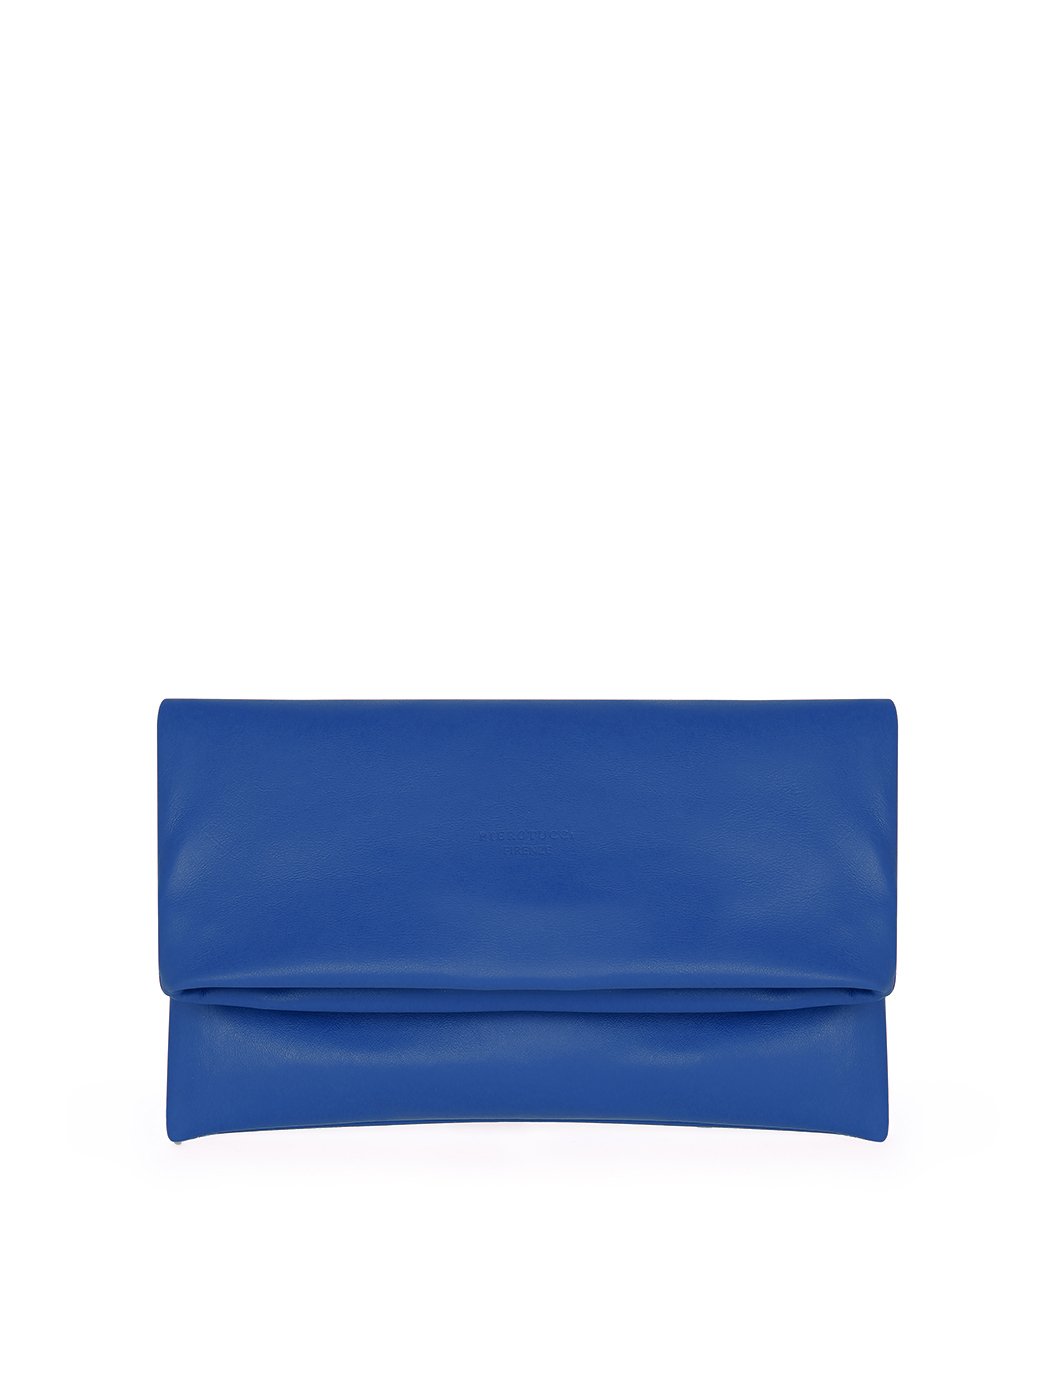 Convertible Crossbody and Clutch Purse Blue